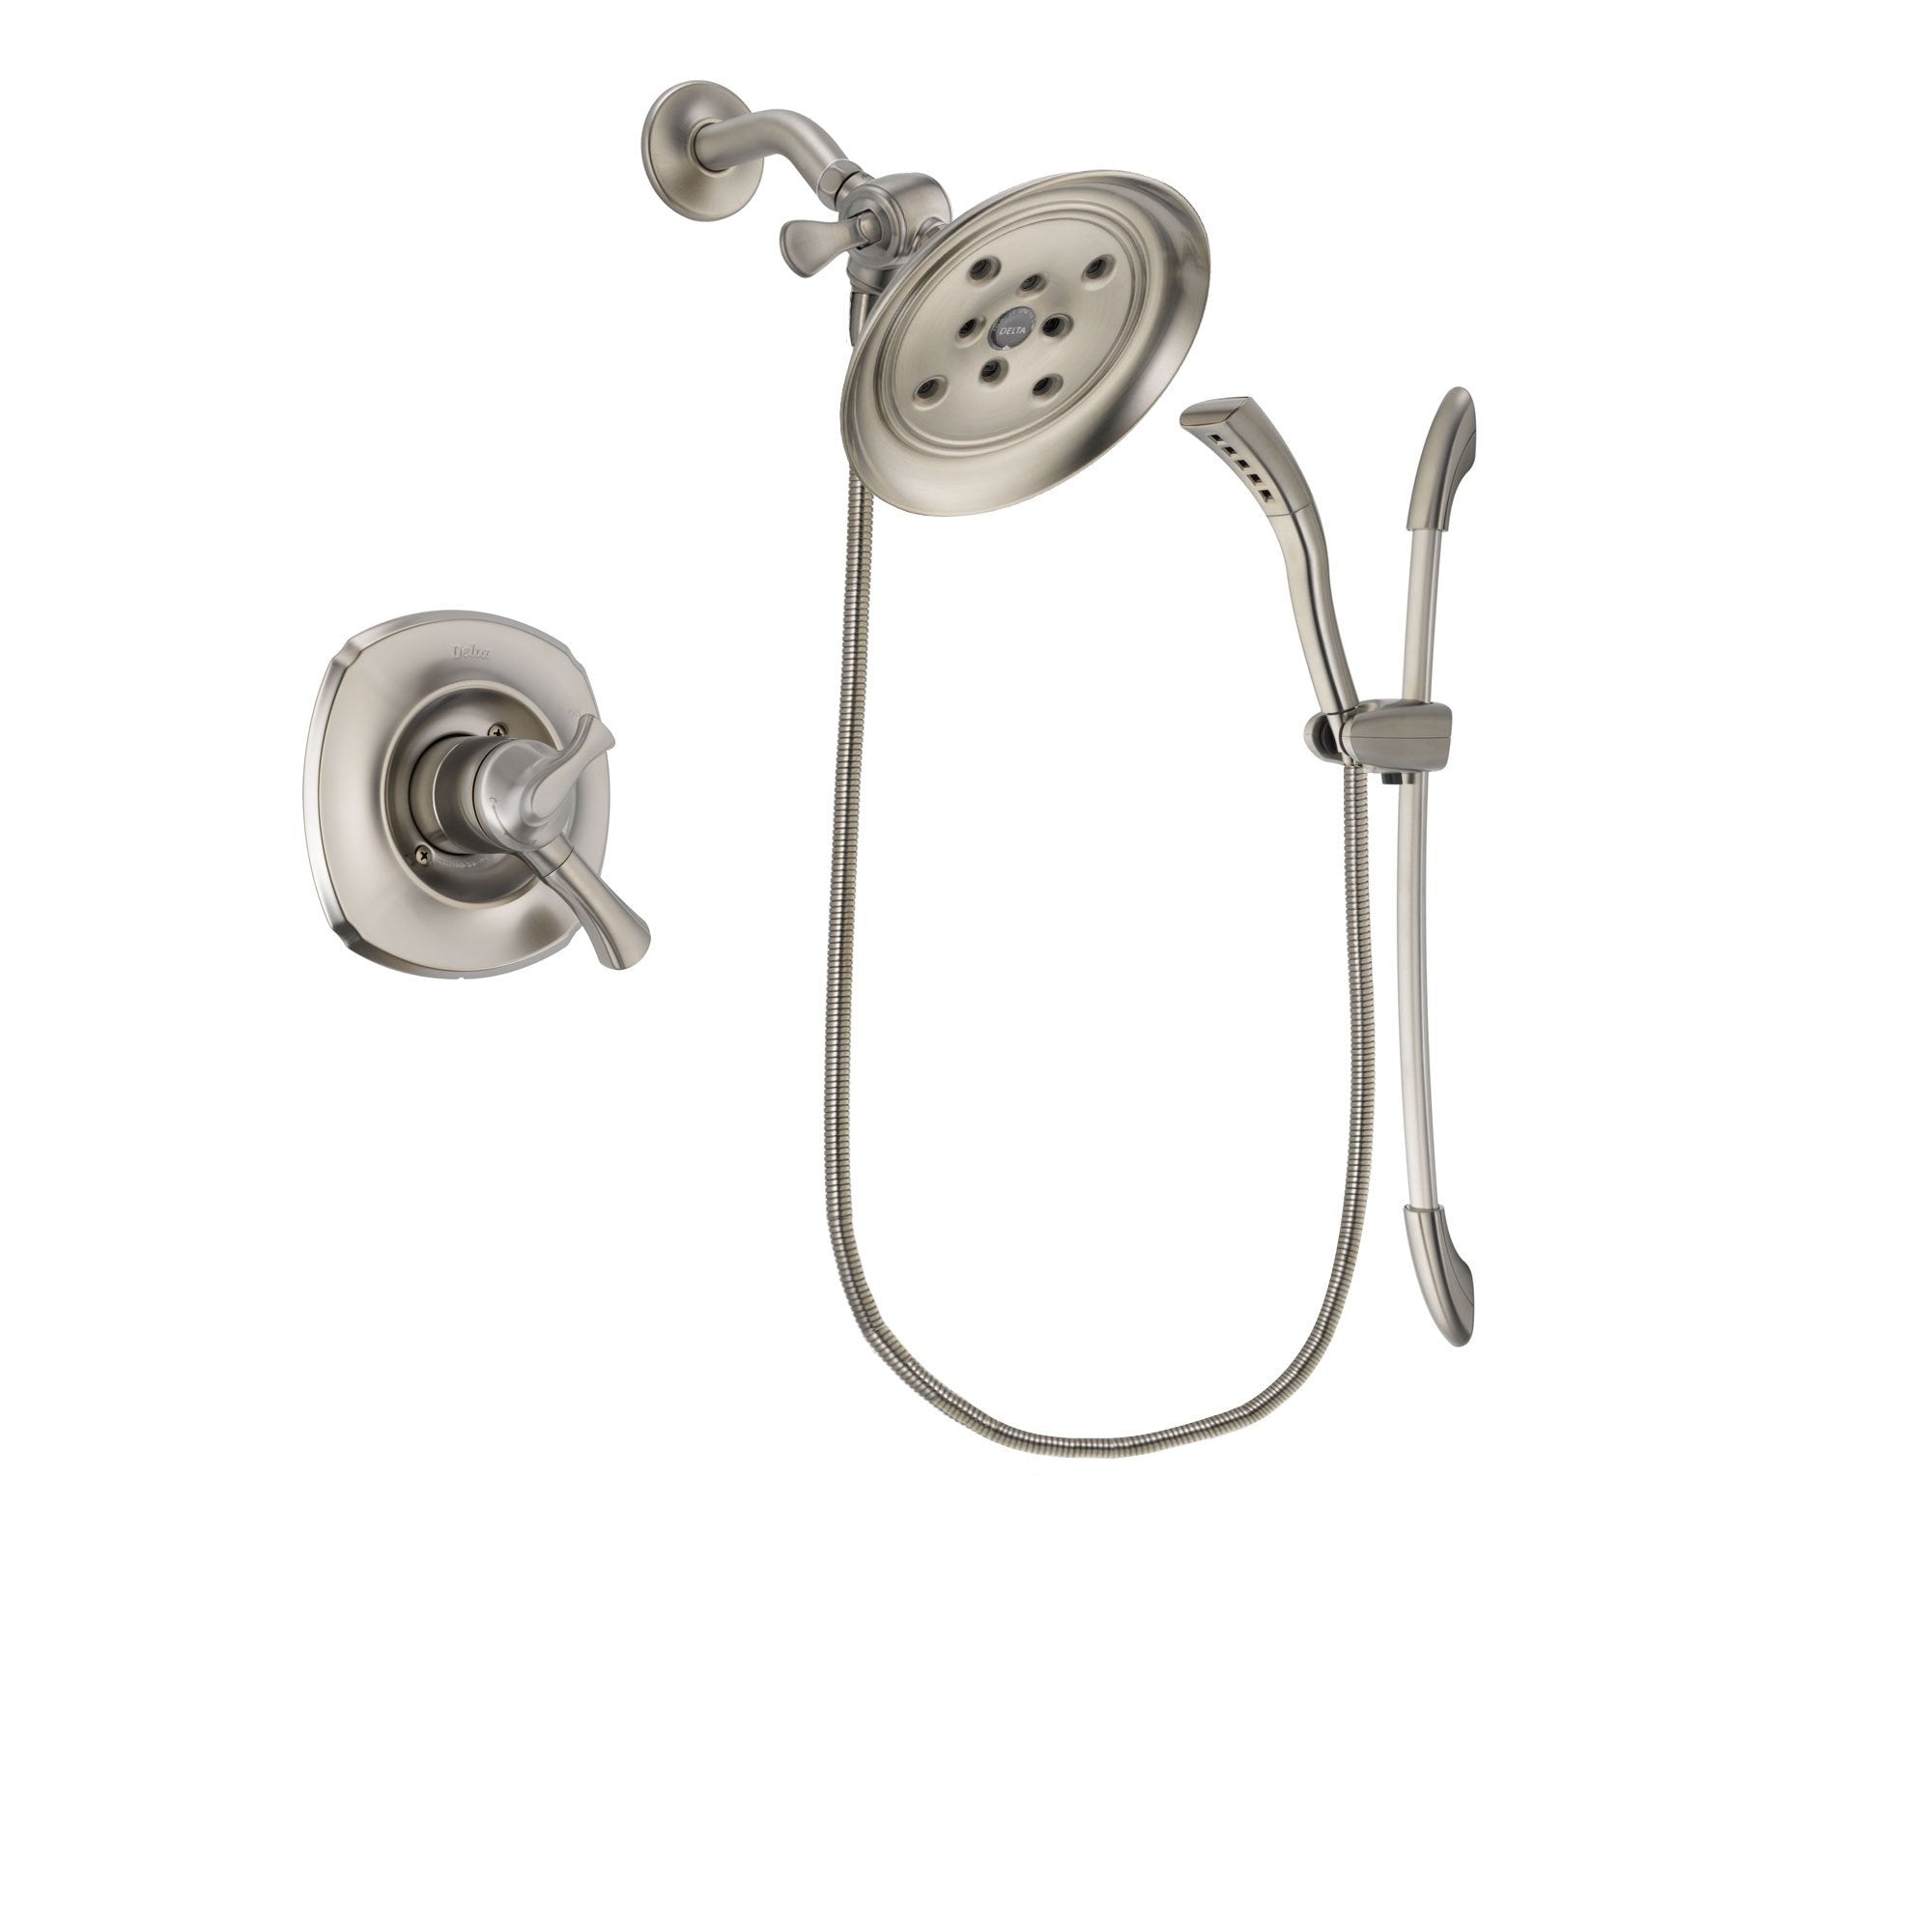 Delta Addison Stainless Steel Finish Dual Control Shower Faucet System Package with Large Rain Showerhead and Handshower with Slide Bar Includes Rough-in Valve DSP1474V